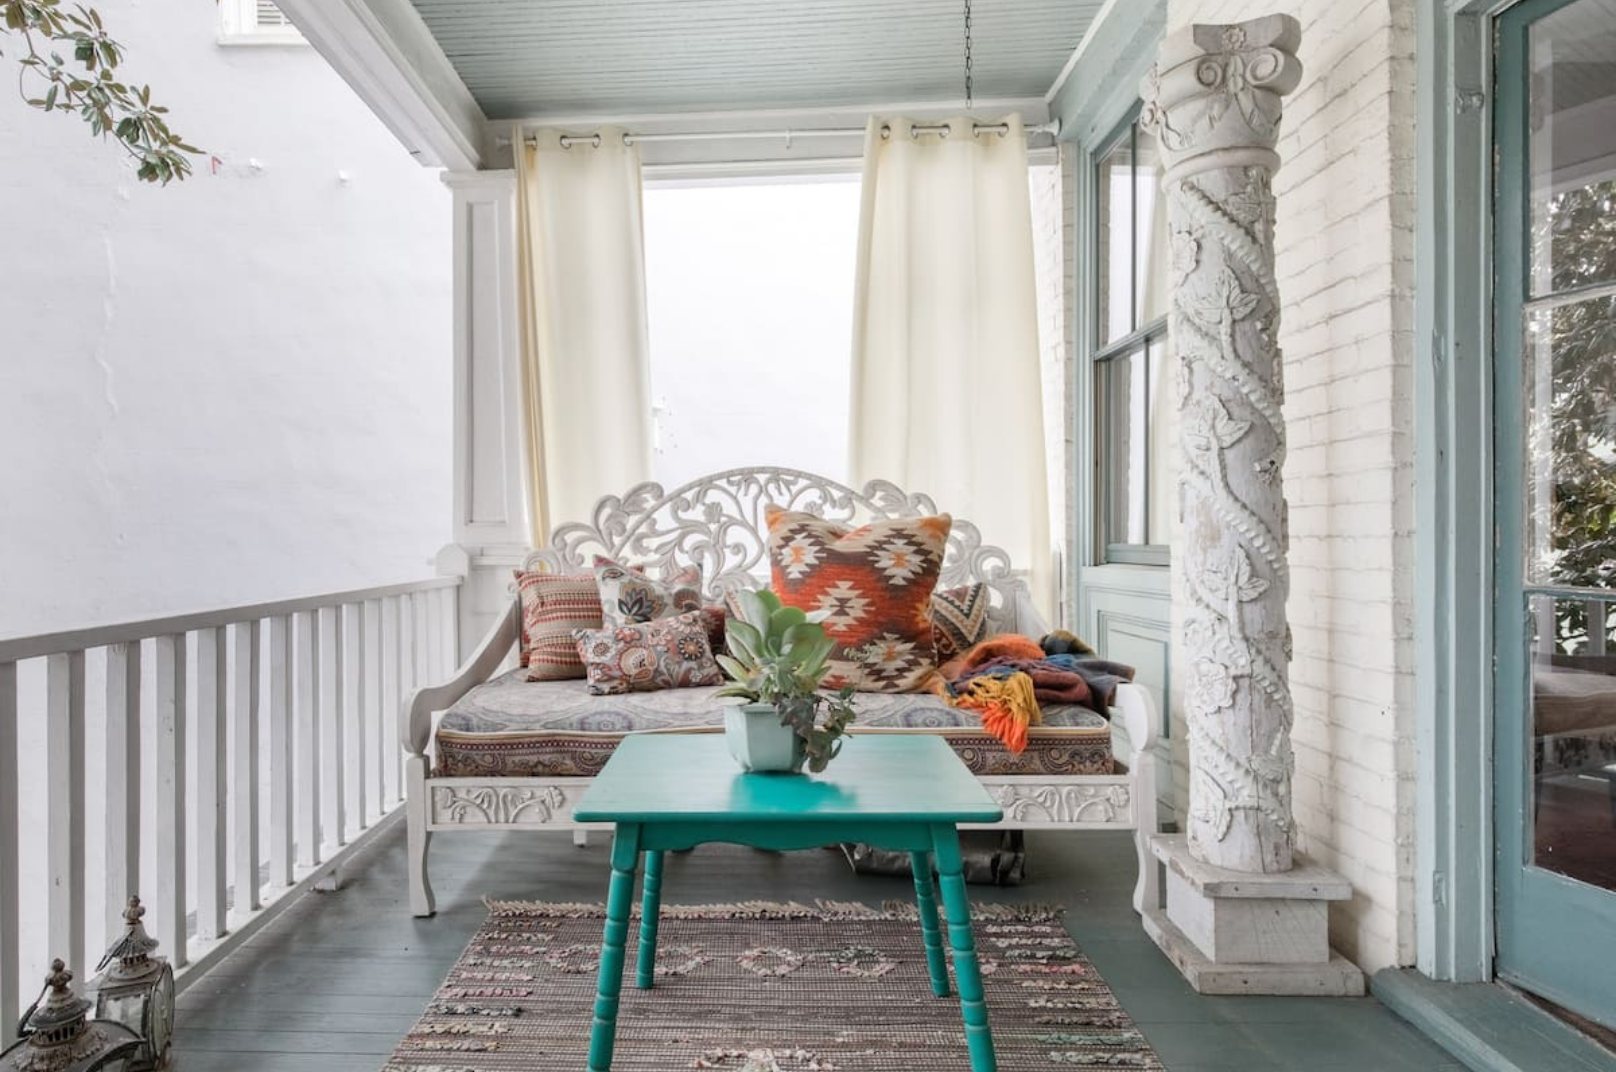 The Best Airbnbs in Charleston, SC